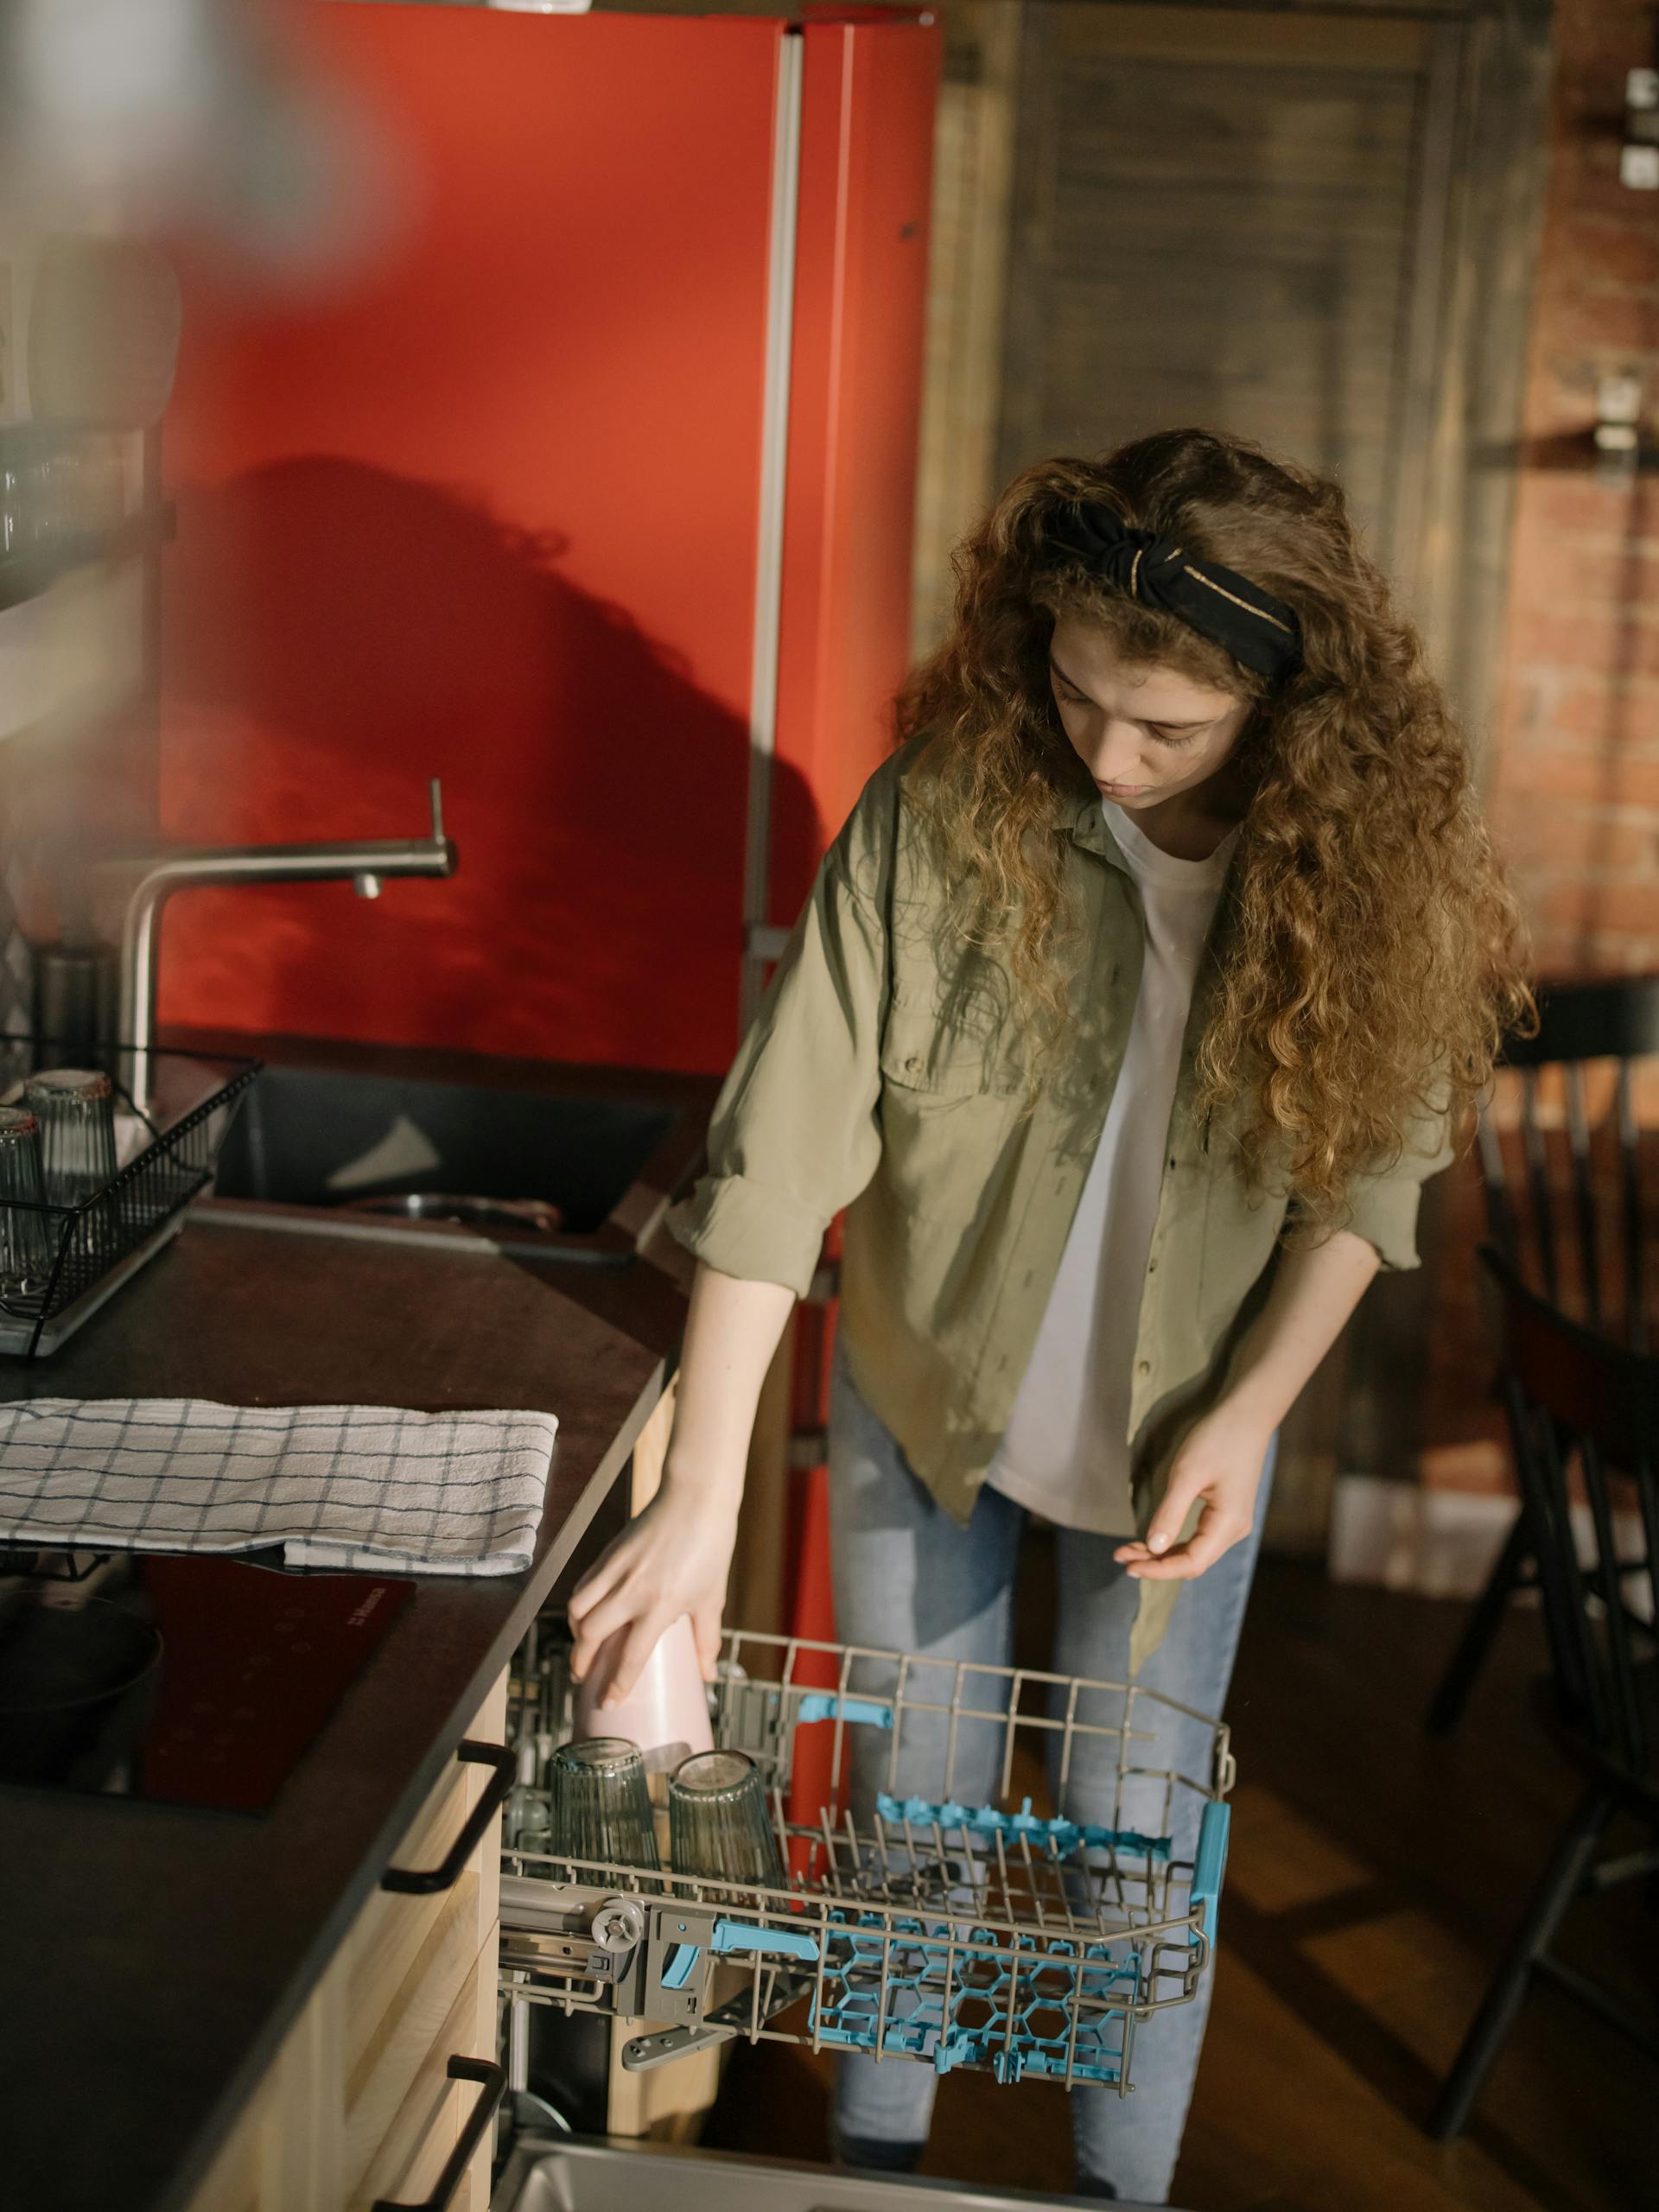 A young woman using a dishwasher | Source: Pexels